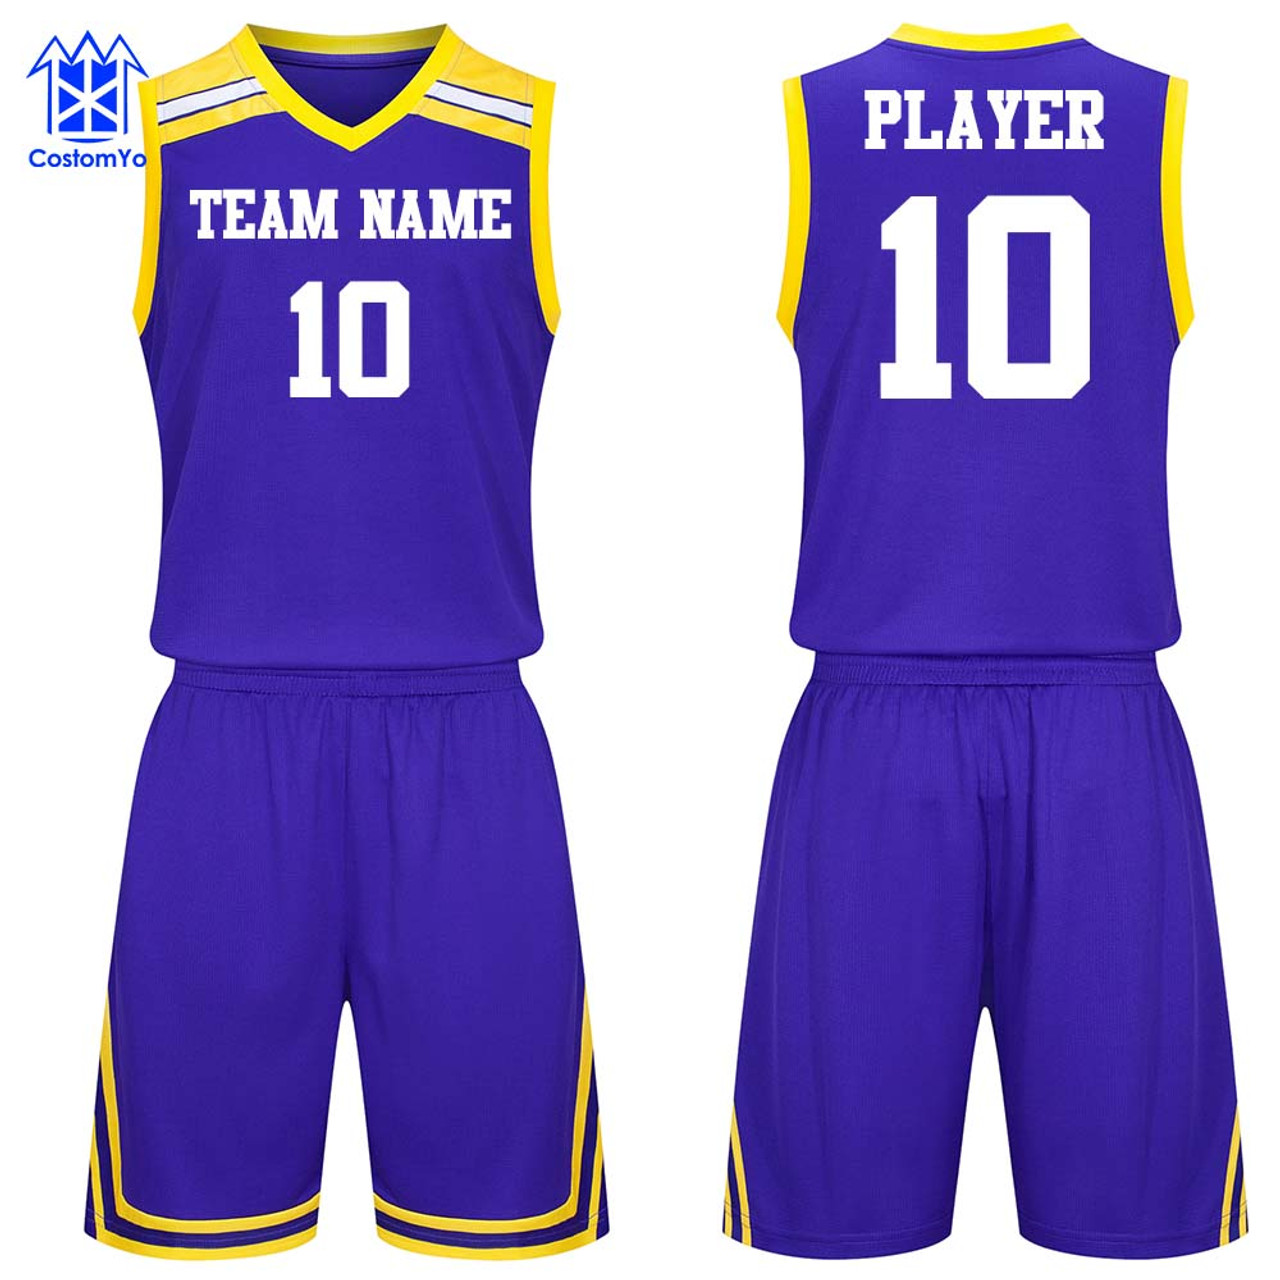 free customize of name and number only washington 11 basketball